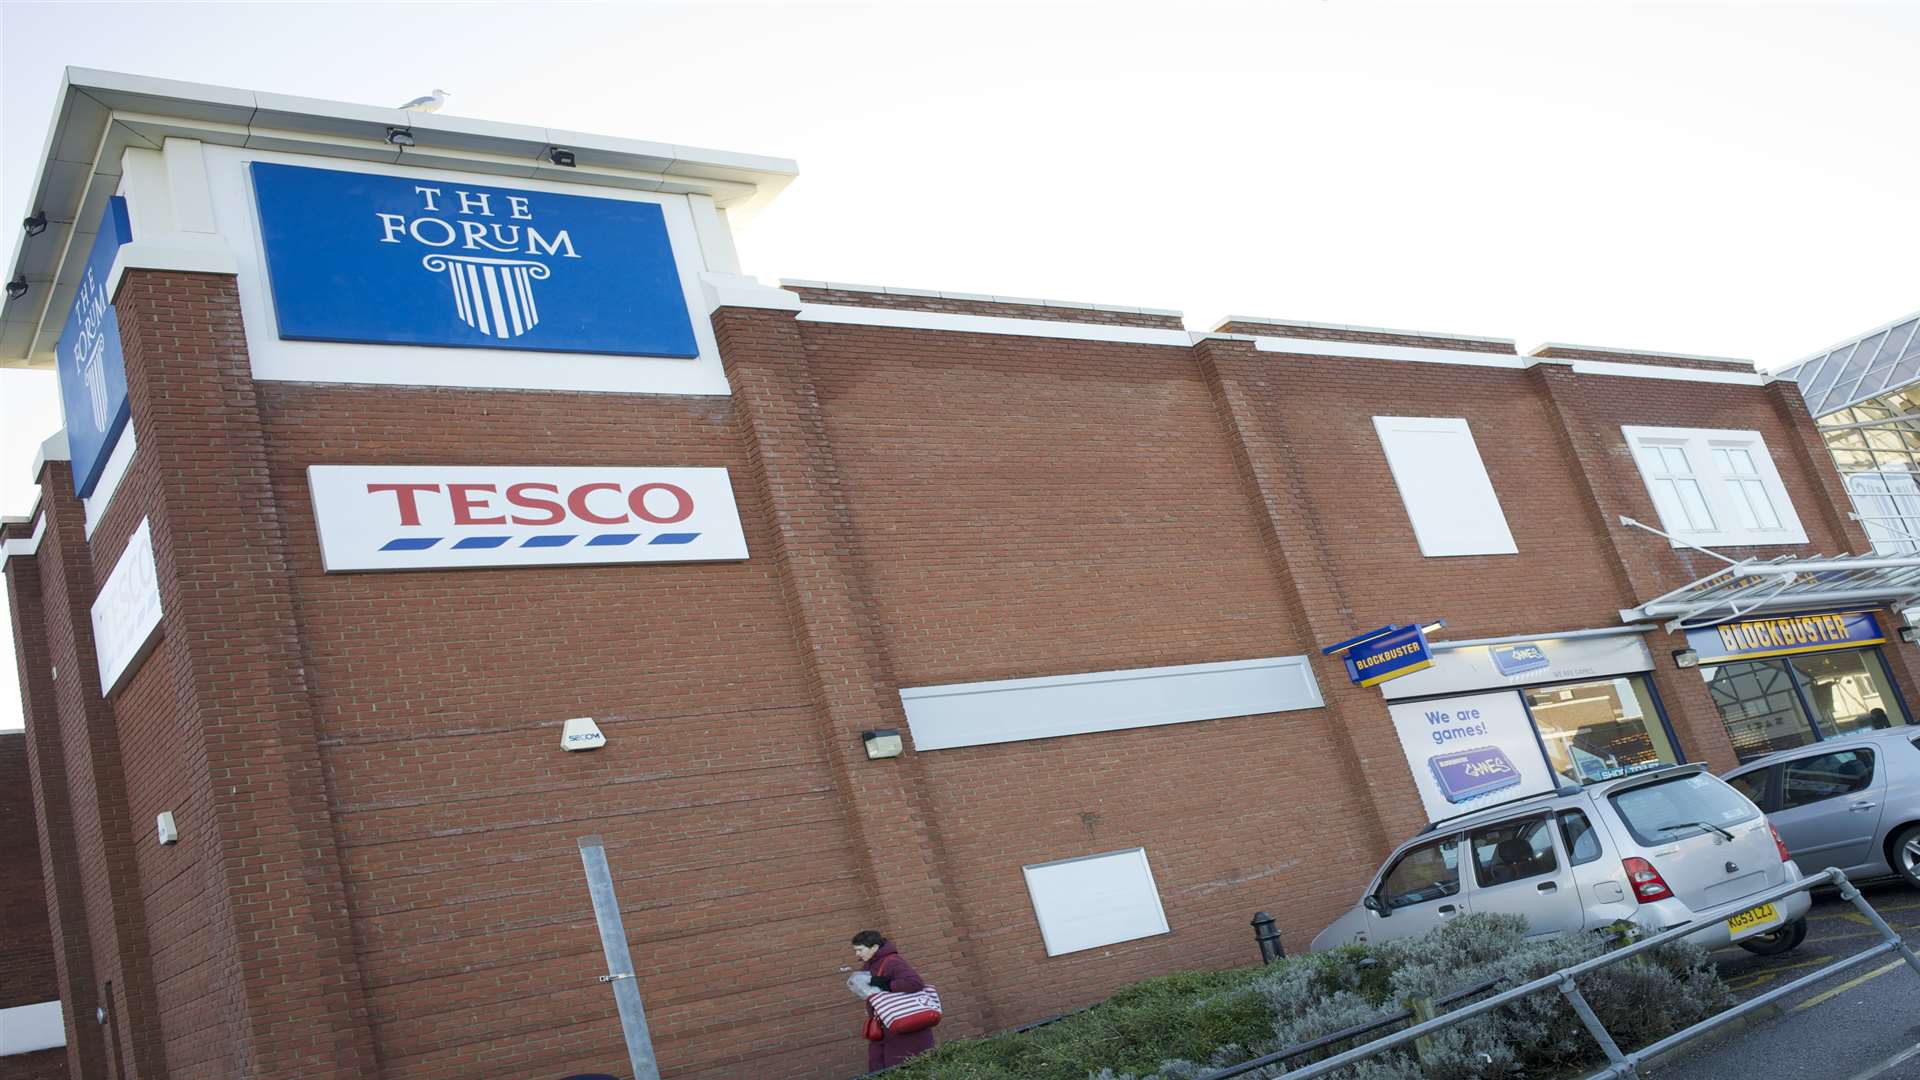 Tesco is to close its store in The Forum shopping centre in Sittingbourne